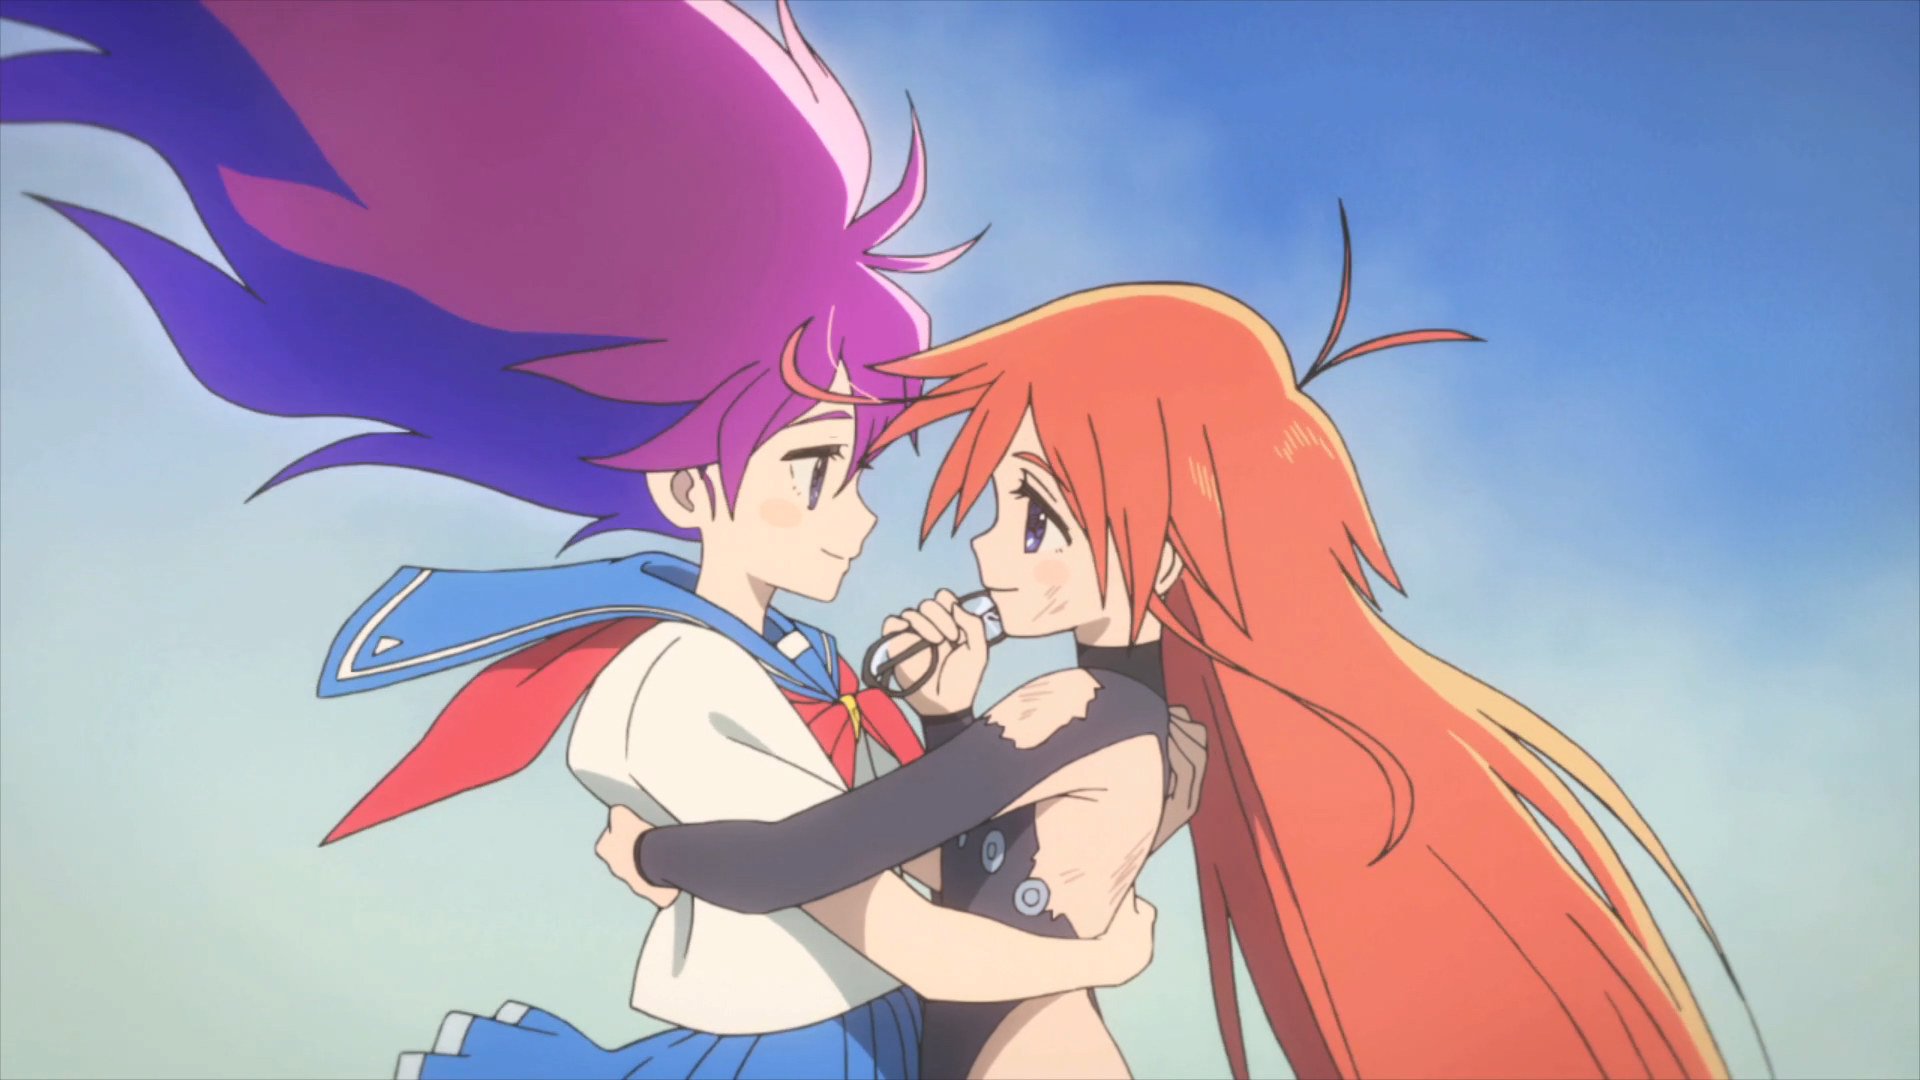 Flip Flappers Wallpaper Hd - Flip Flappers Papika And Cocona , HD Wallpaper & Backgrounds